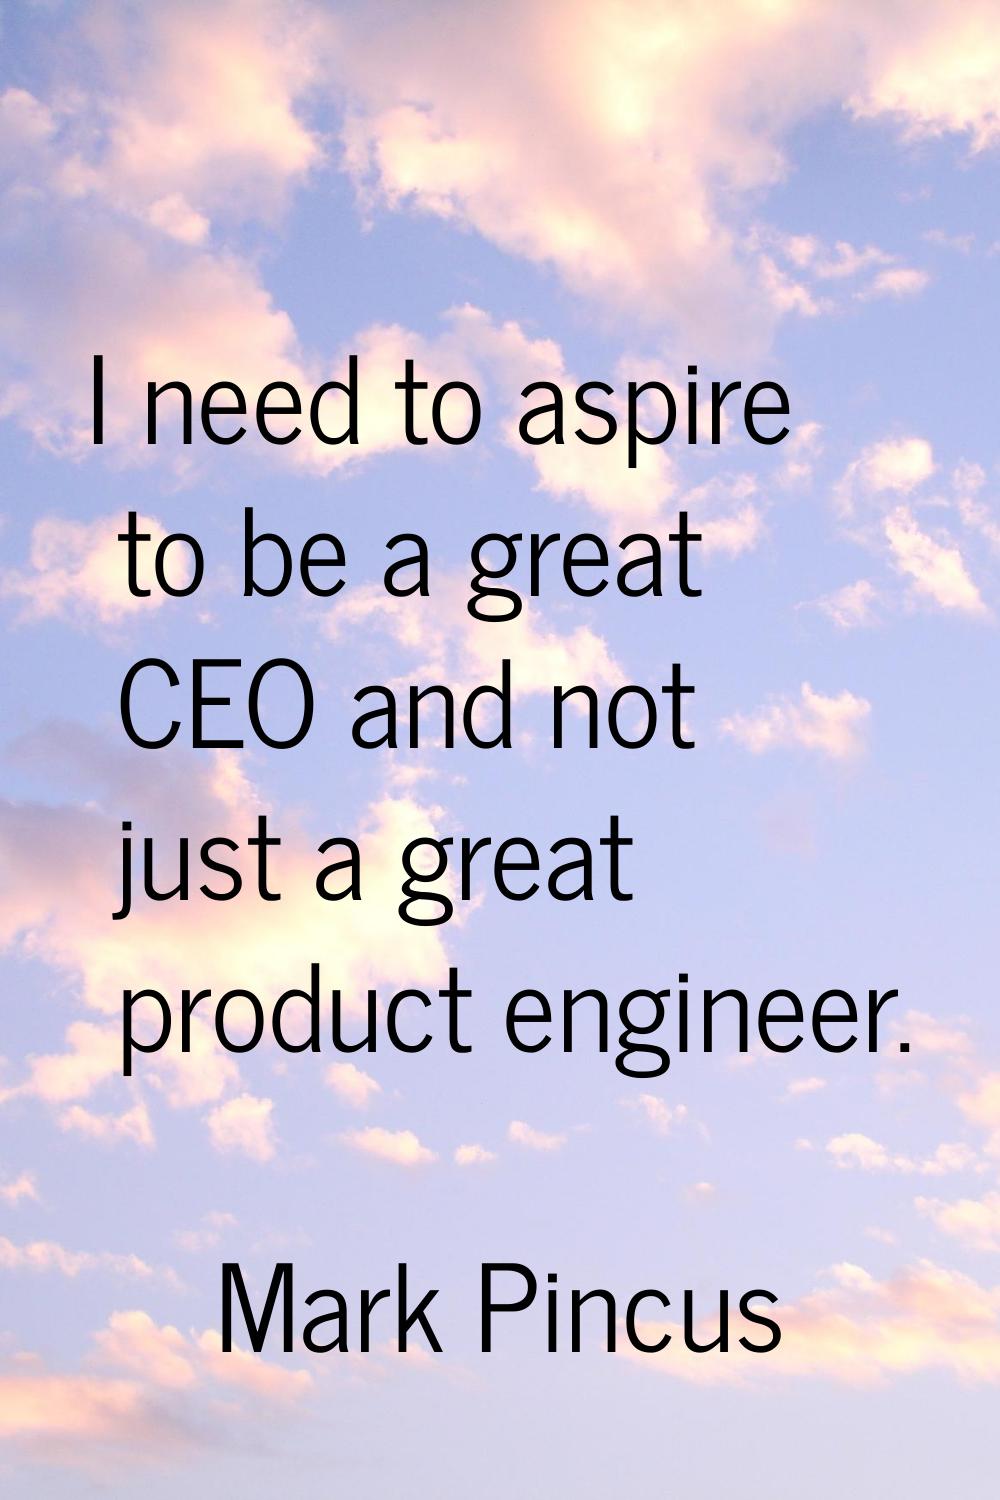 I need to aspire to be a great CEO and not just a great product engineer.